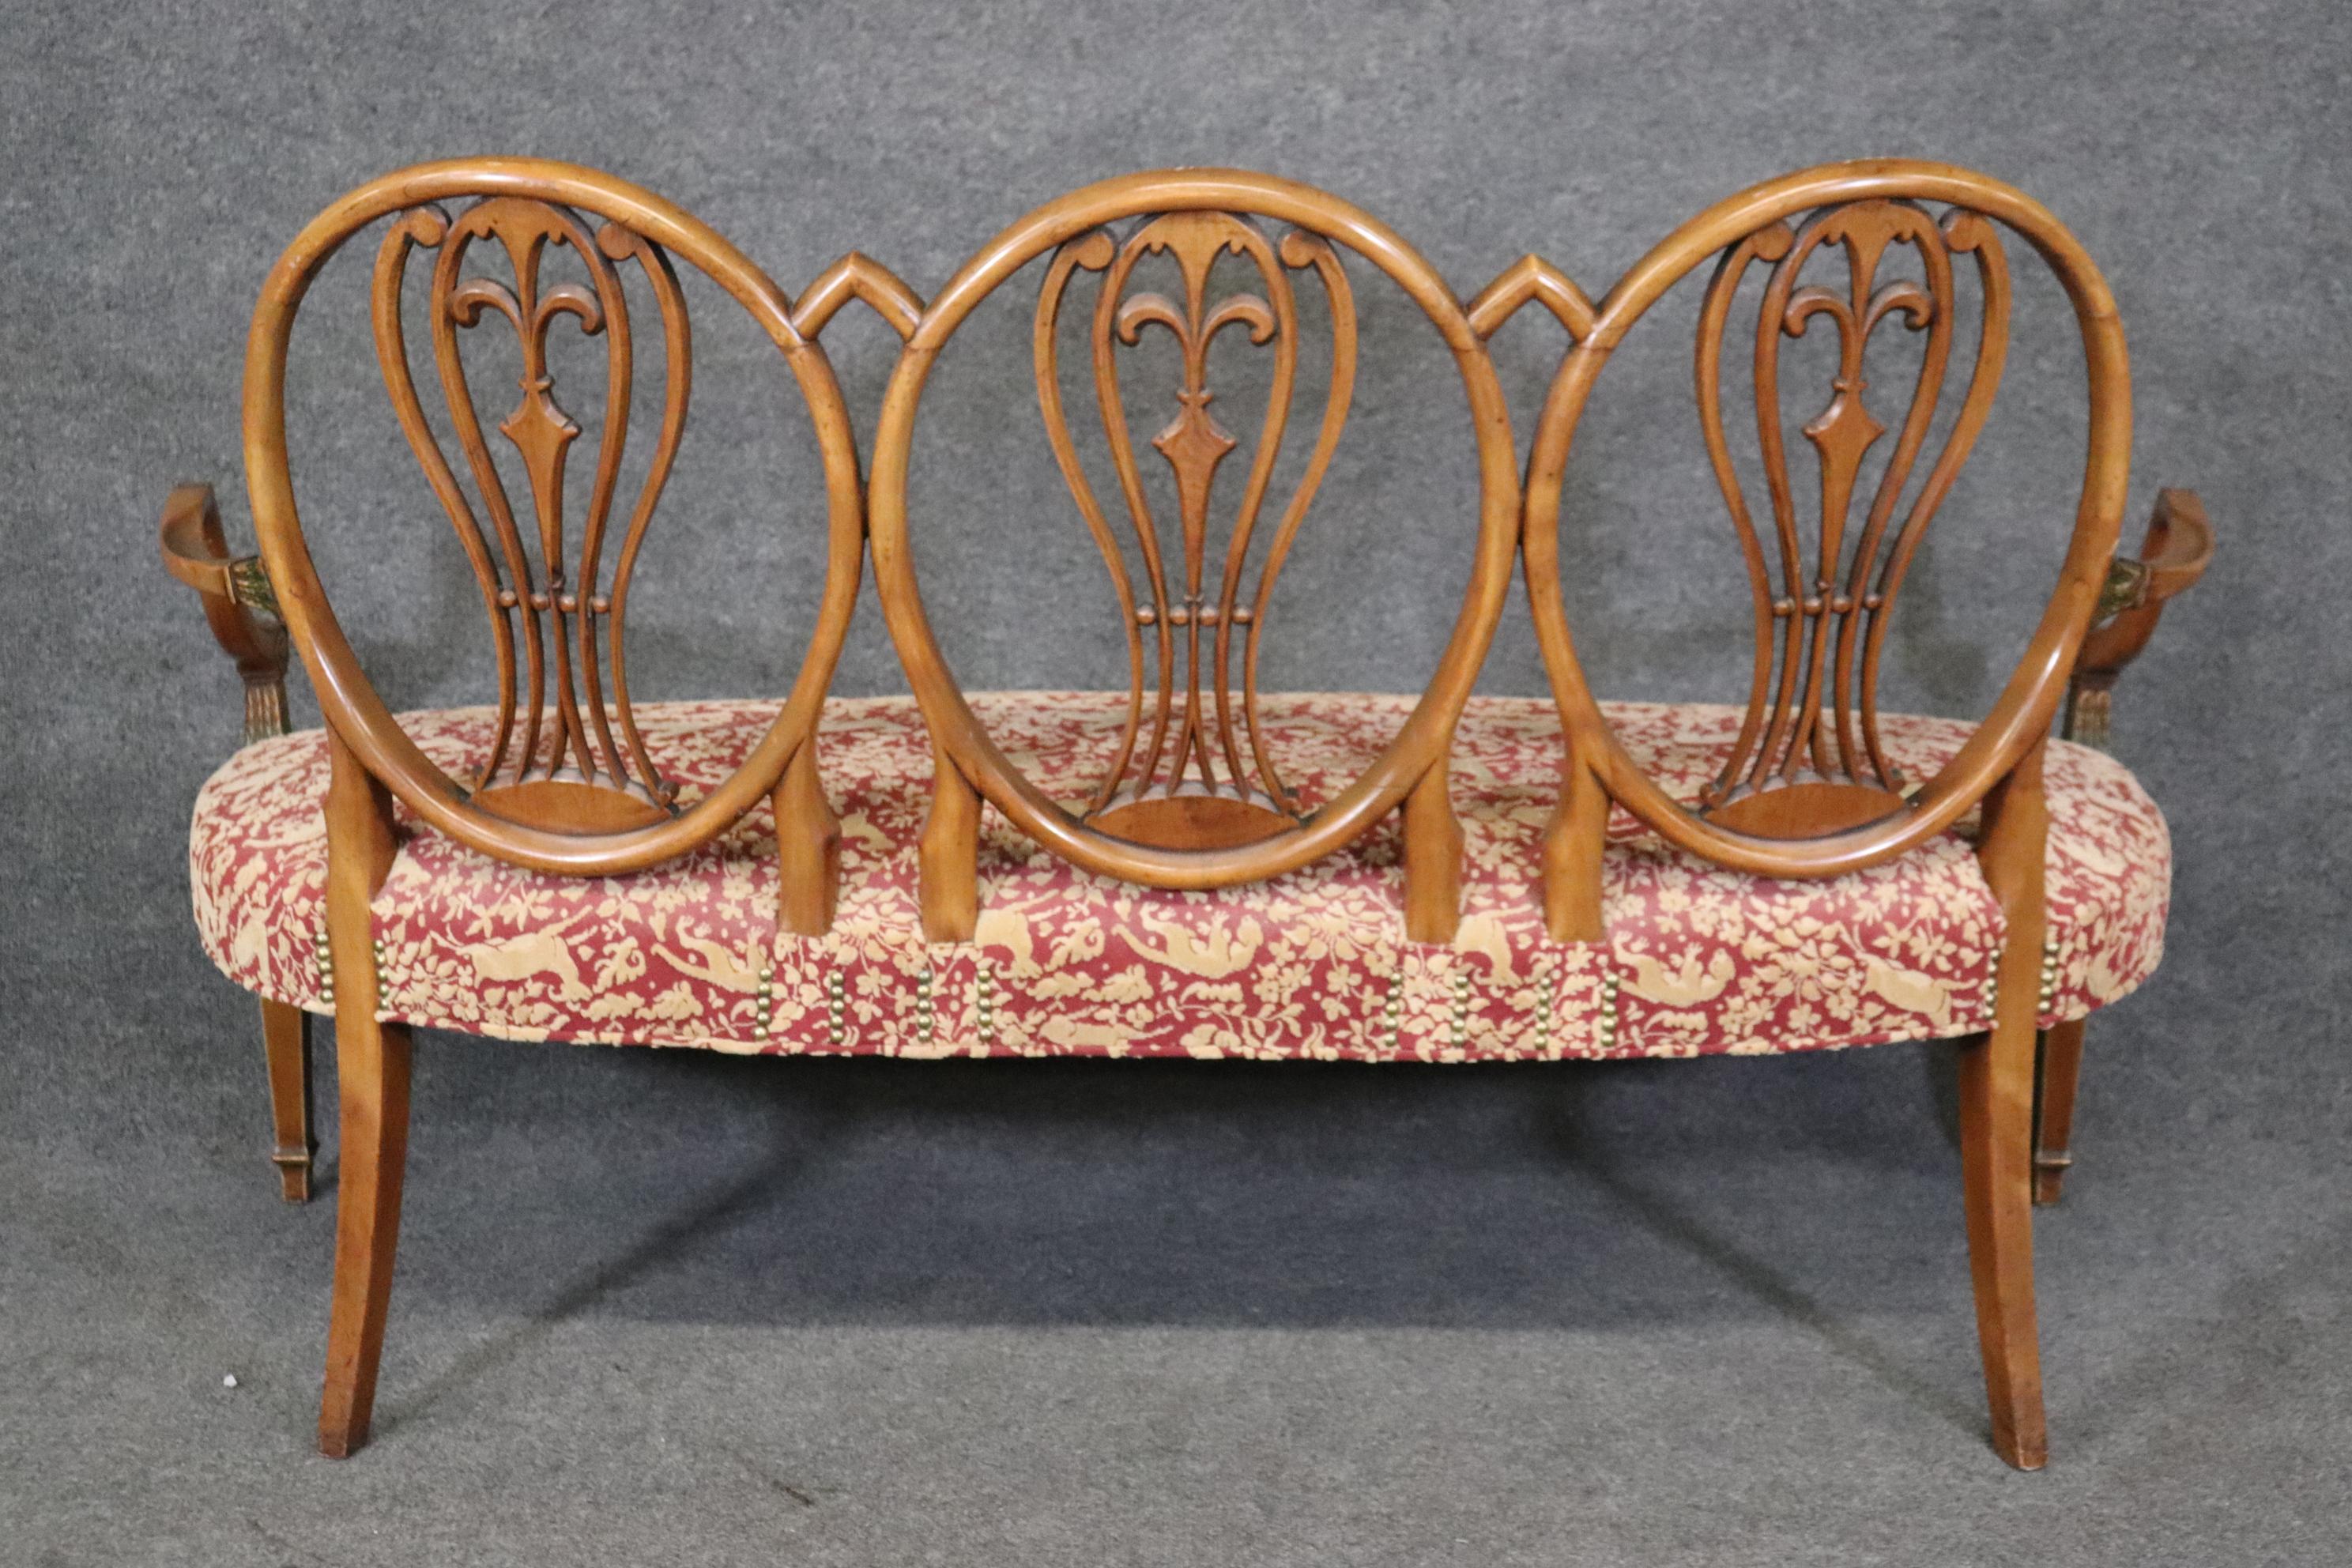 Early 20th Century Incredible Adams Painted Decorated Triple Oval Back Settee Circa 1910 For Sale